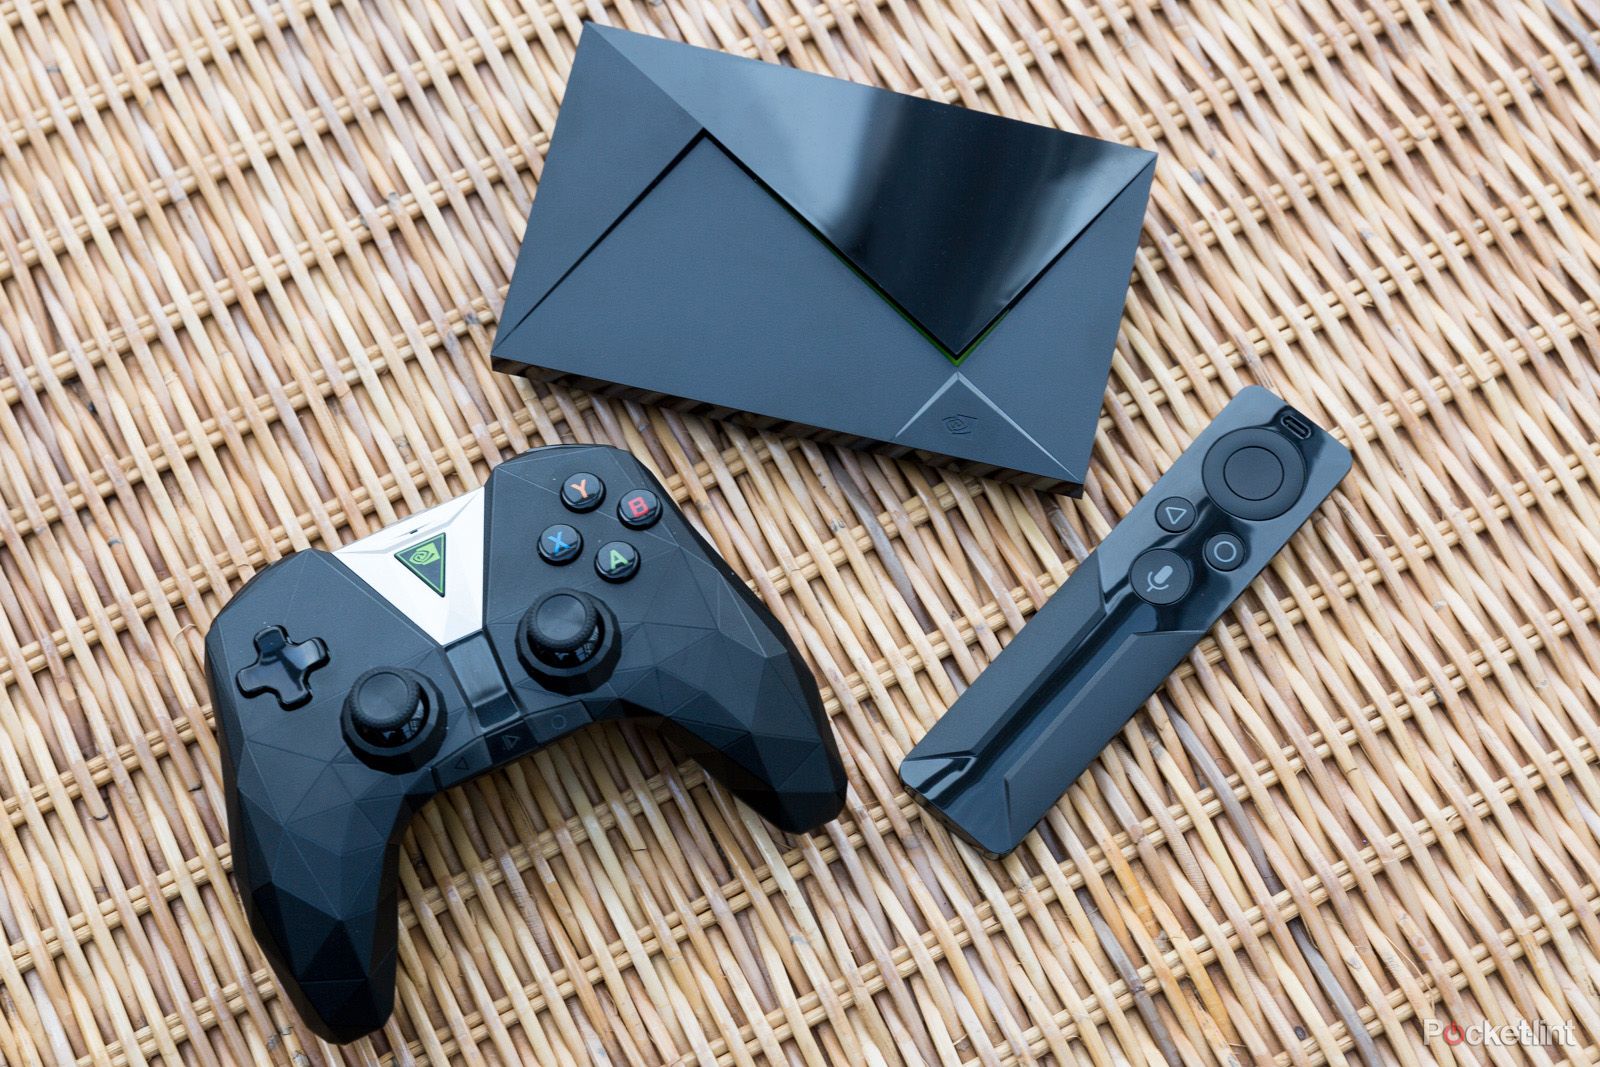 New Nvidia Shield TV could be incoming running Android 9 image 1